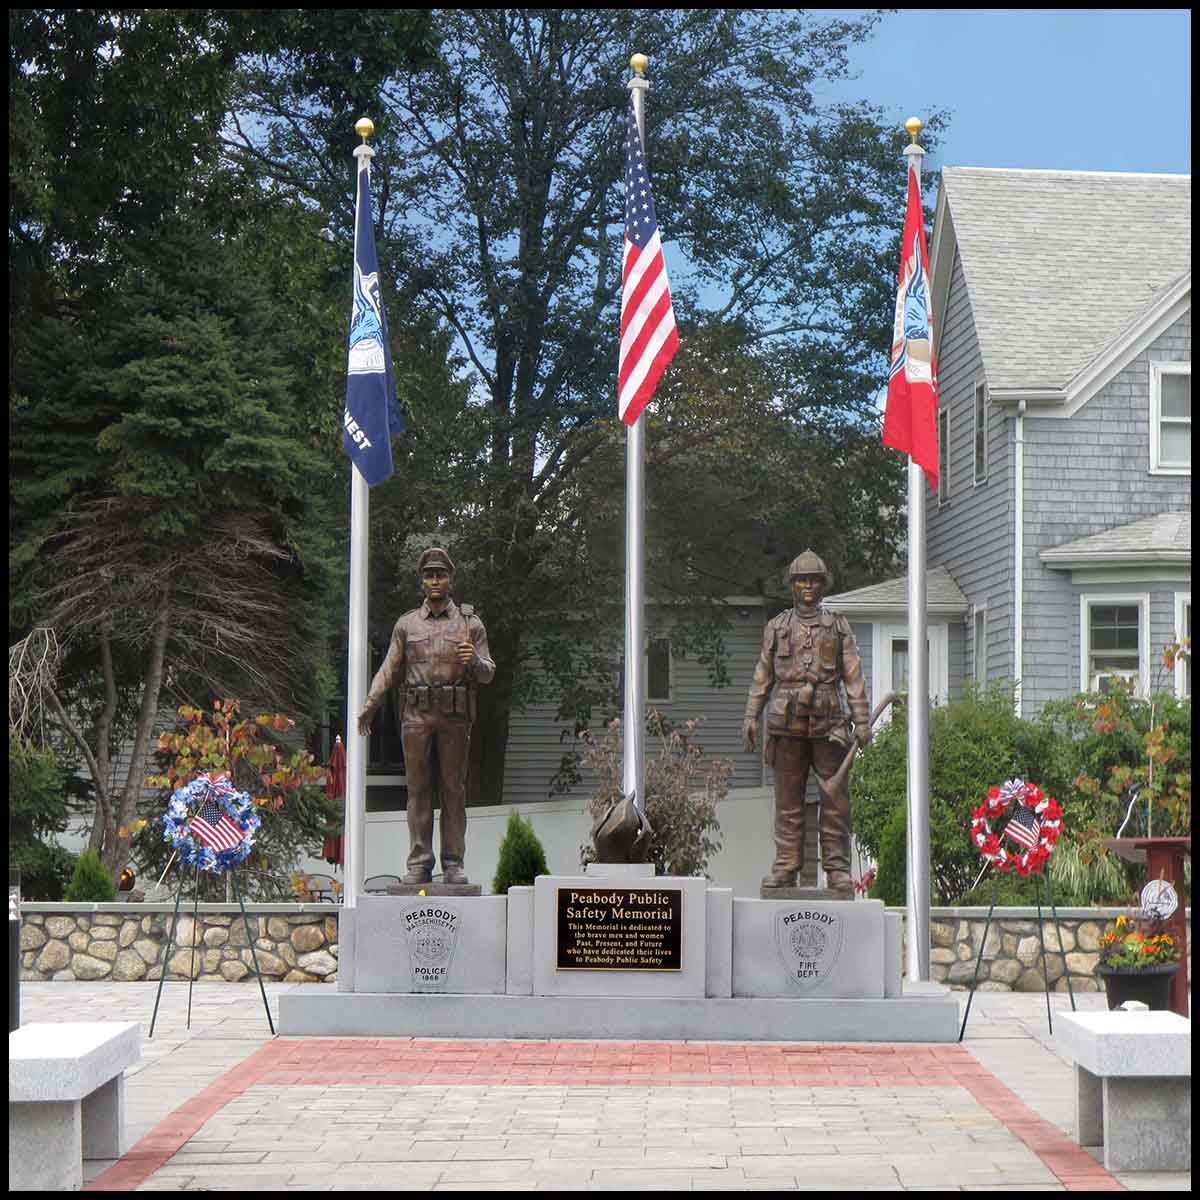 photo of outdoor memorial of bronze sculptures of a firefighter, a police officer, and an eternal flame on a large stone base with etchings and a bronze plaque in a paved site with three flags behind and trees and building behind